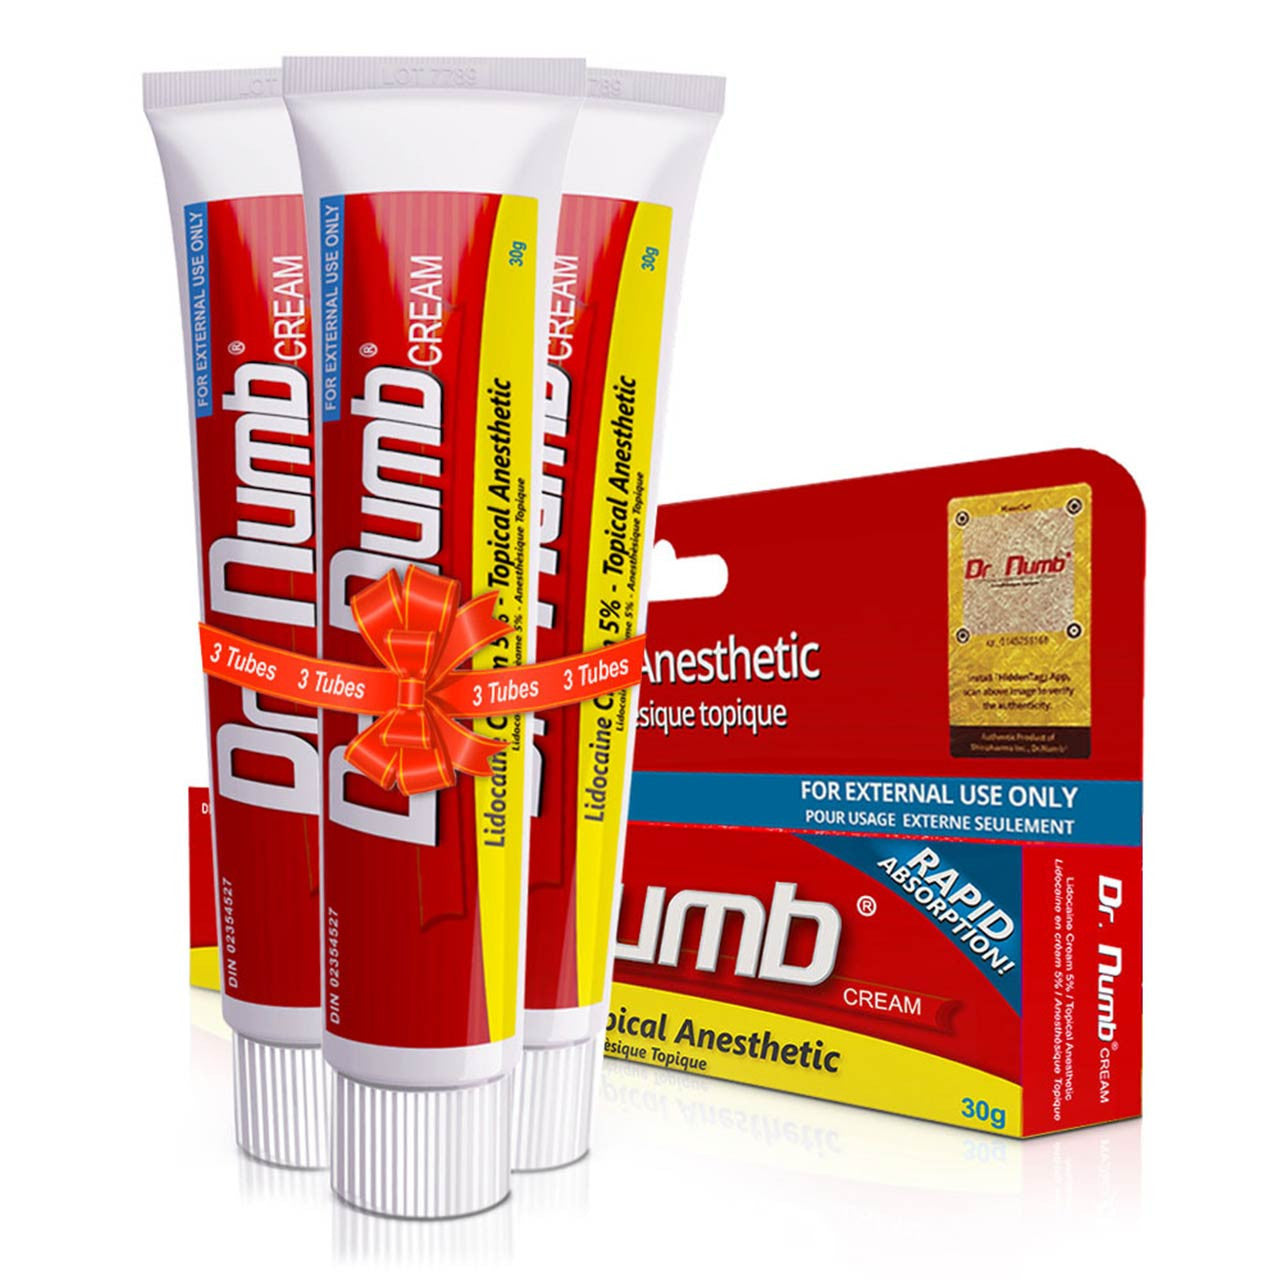 Numb the Pain - Dr. Numb® 5% Cream (30g)